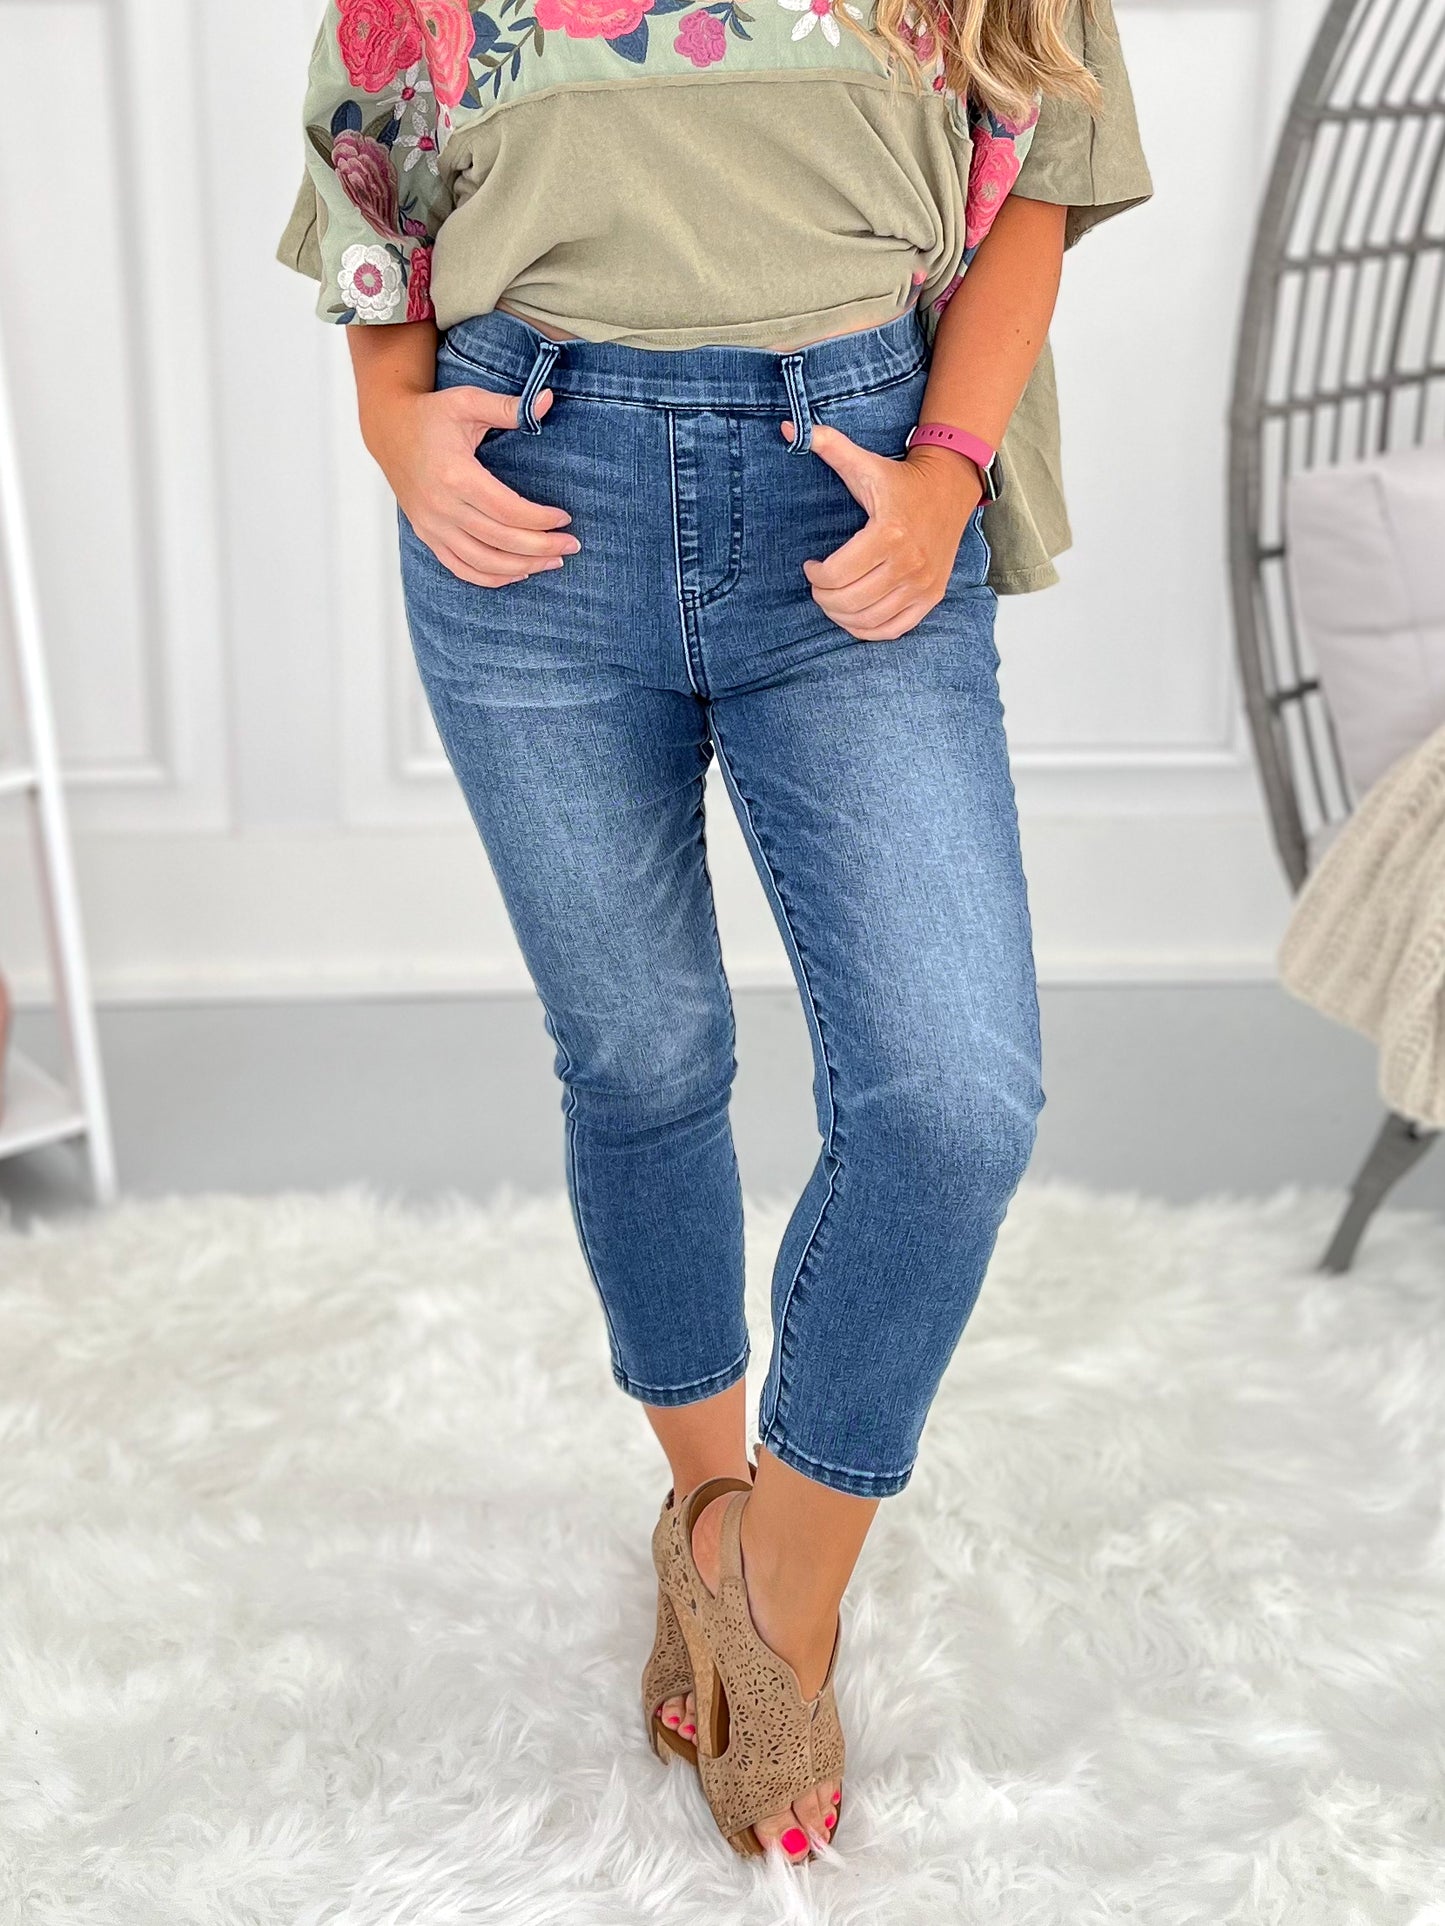 Chill Out - Judy Blue Cool Denim Pull On Capris